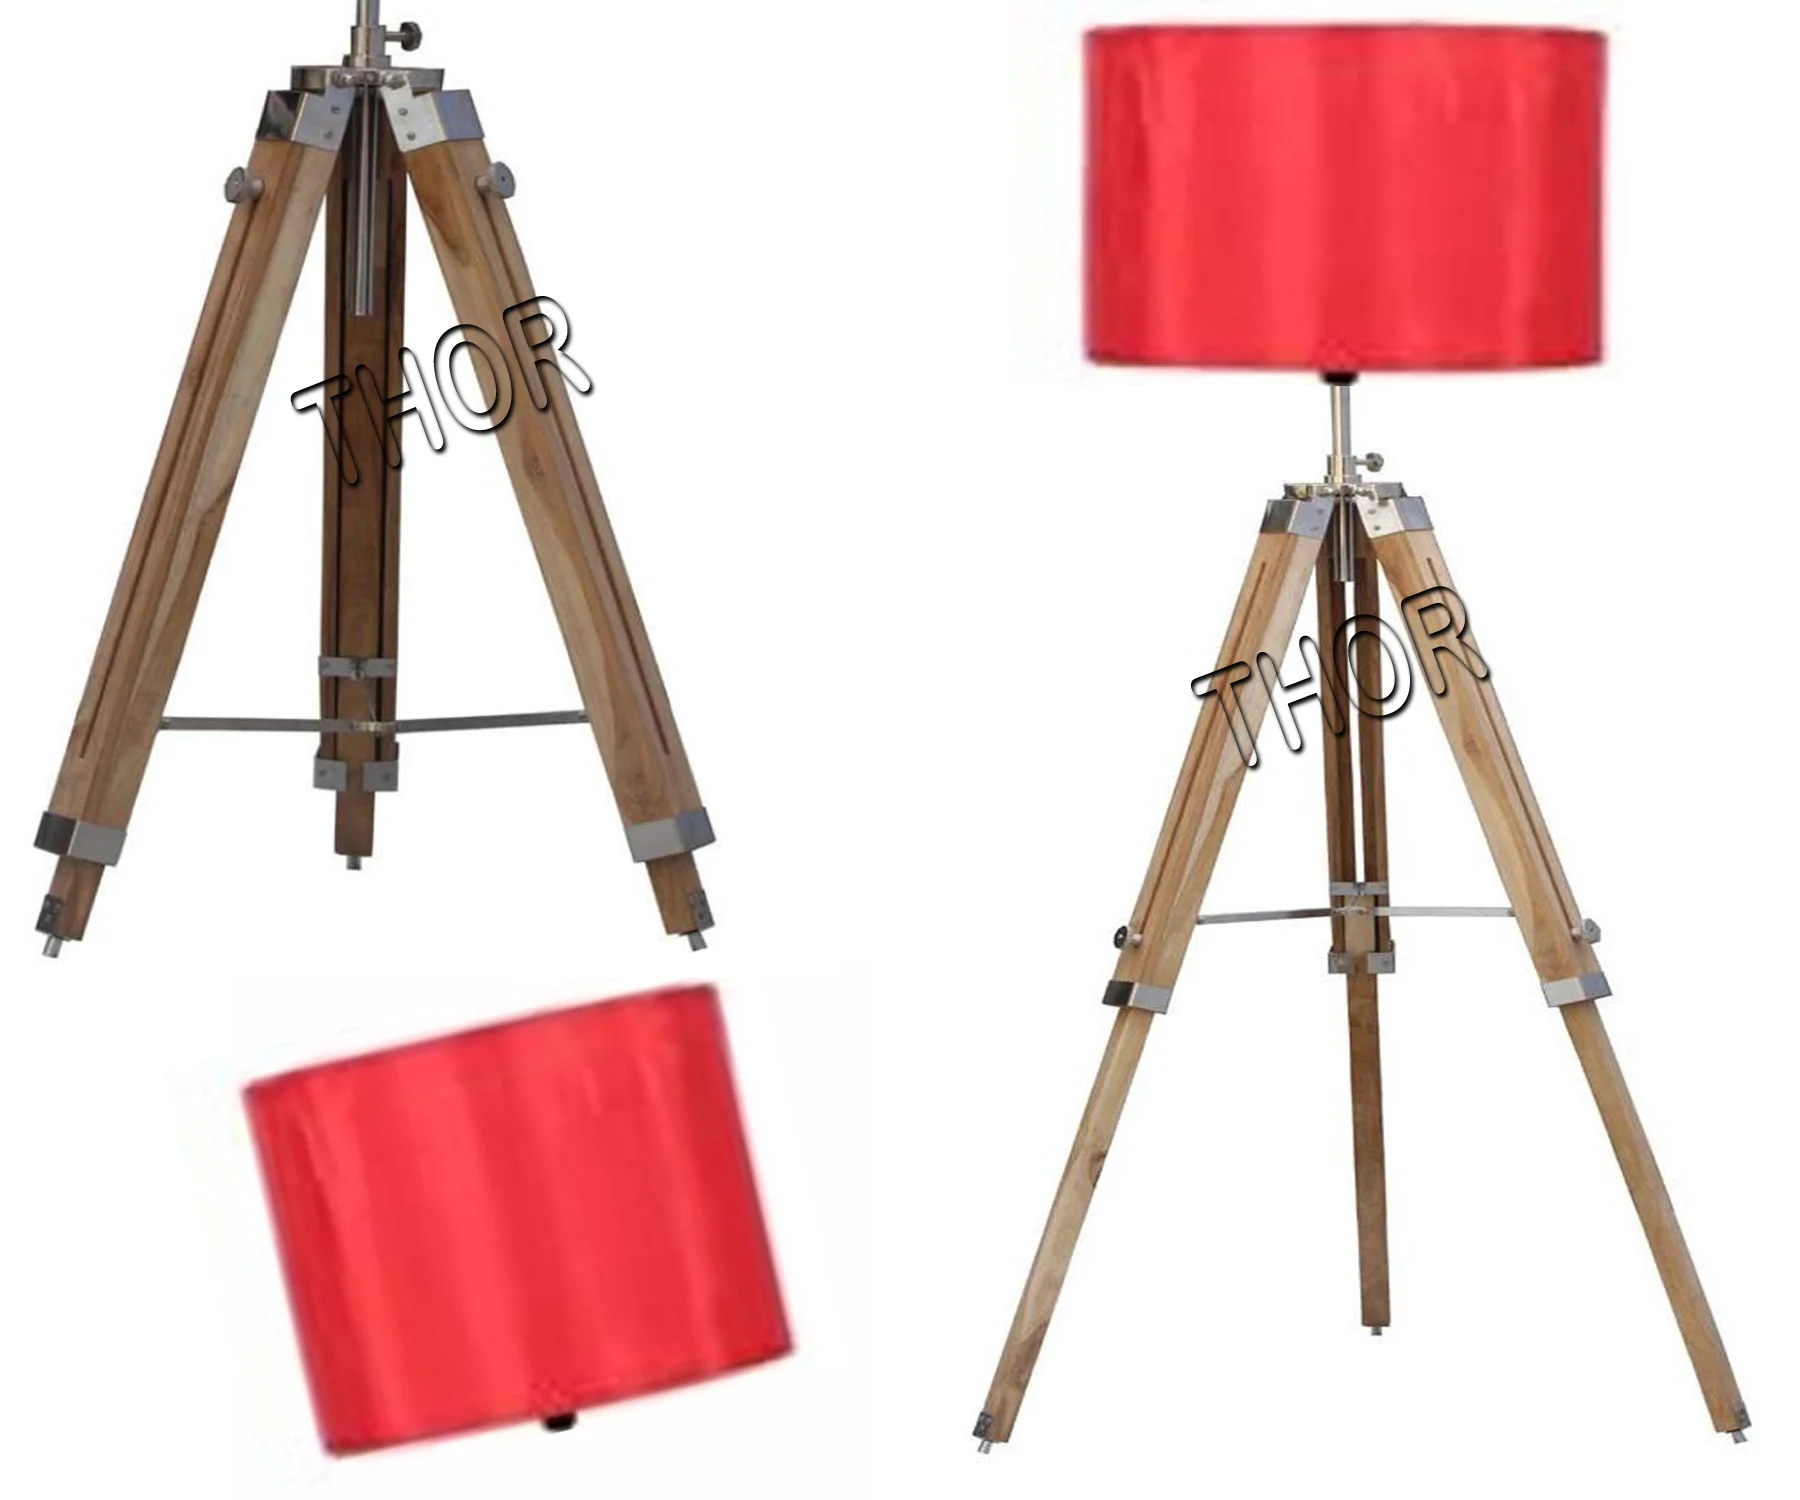 Nautical Table Lamp Lighting Adjustable Wooden Tripod Stand for Home Decorative 